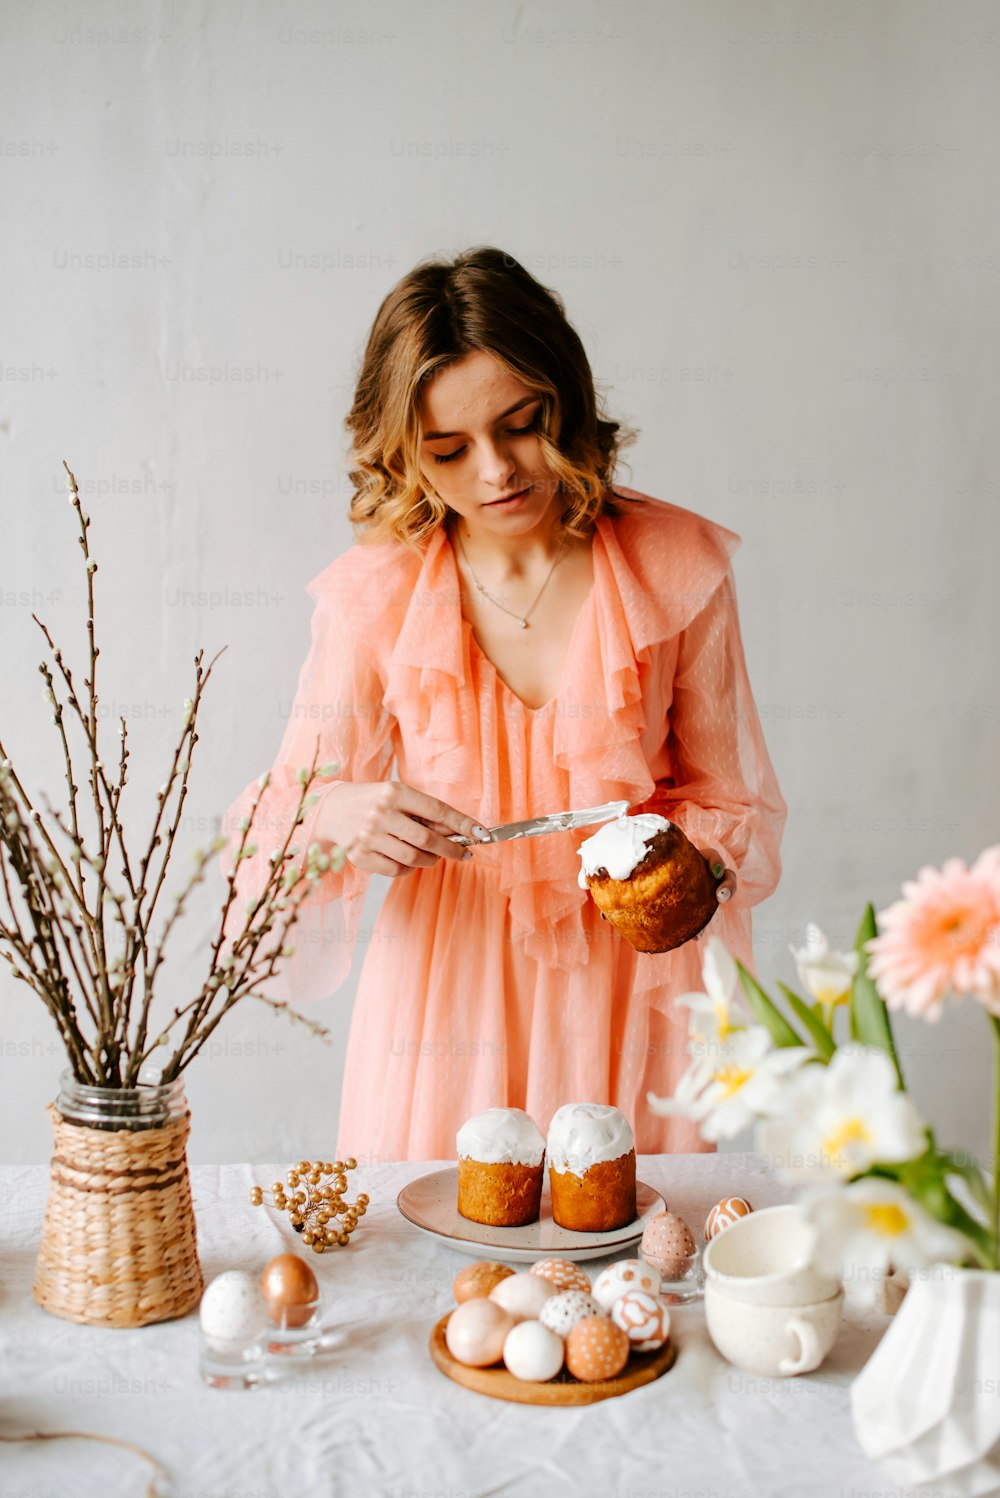 a woman in a pink dress is decorating cupcakes